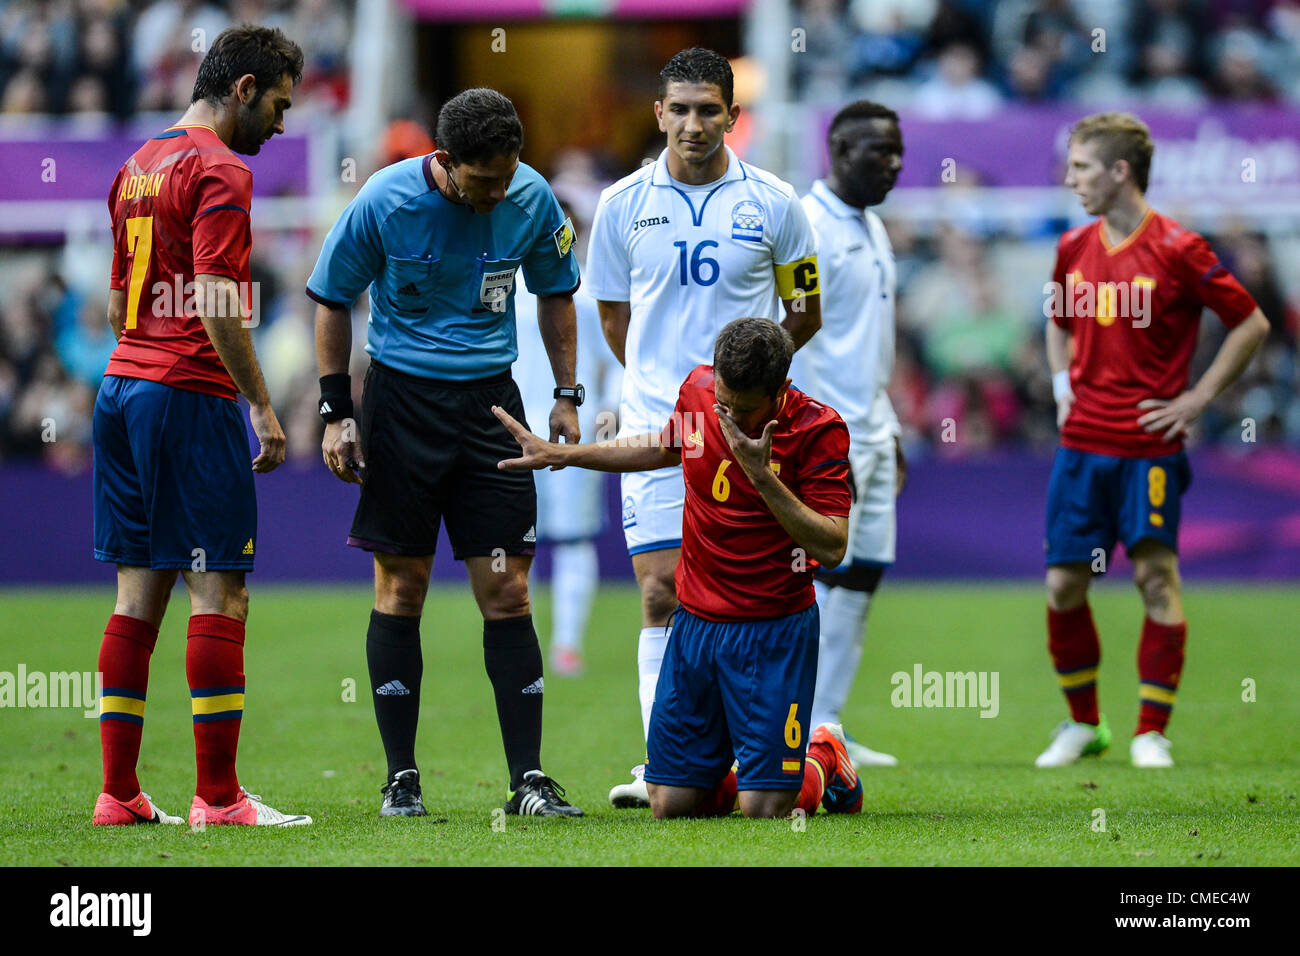 29.07.2012 Newcastle, England. Jordi Alba holds his throat after a rough tackle from Luis Garrido during the Olympic Football Men's Preliminary game between Spain and Honduras from St James Park. Stock Photo